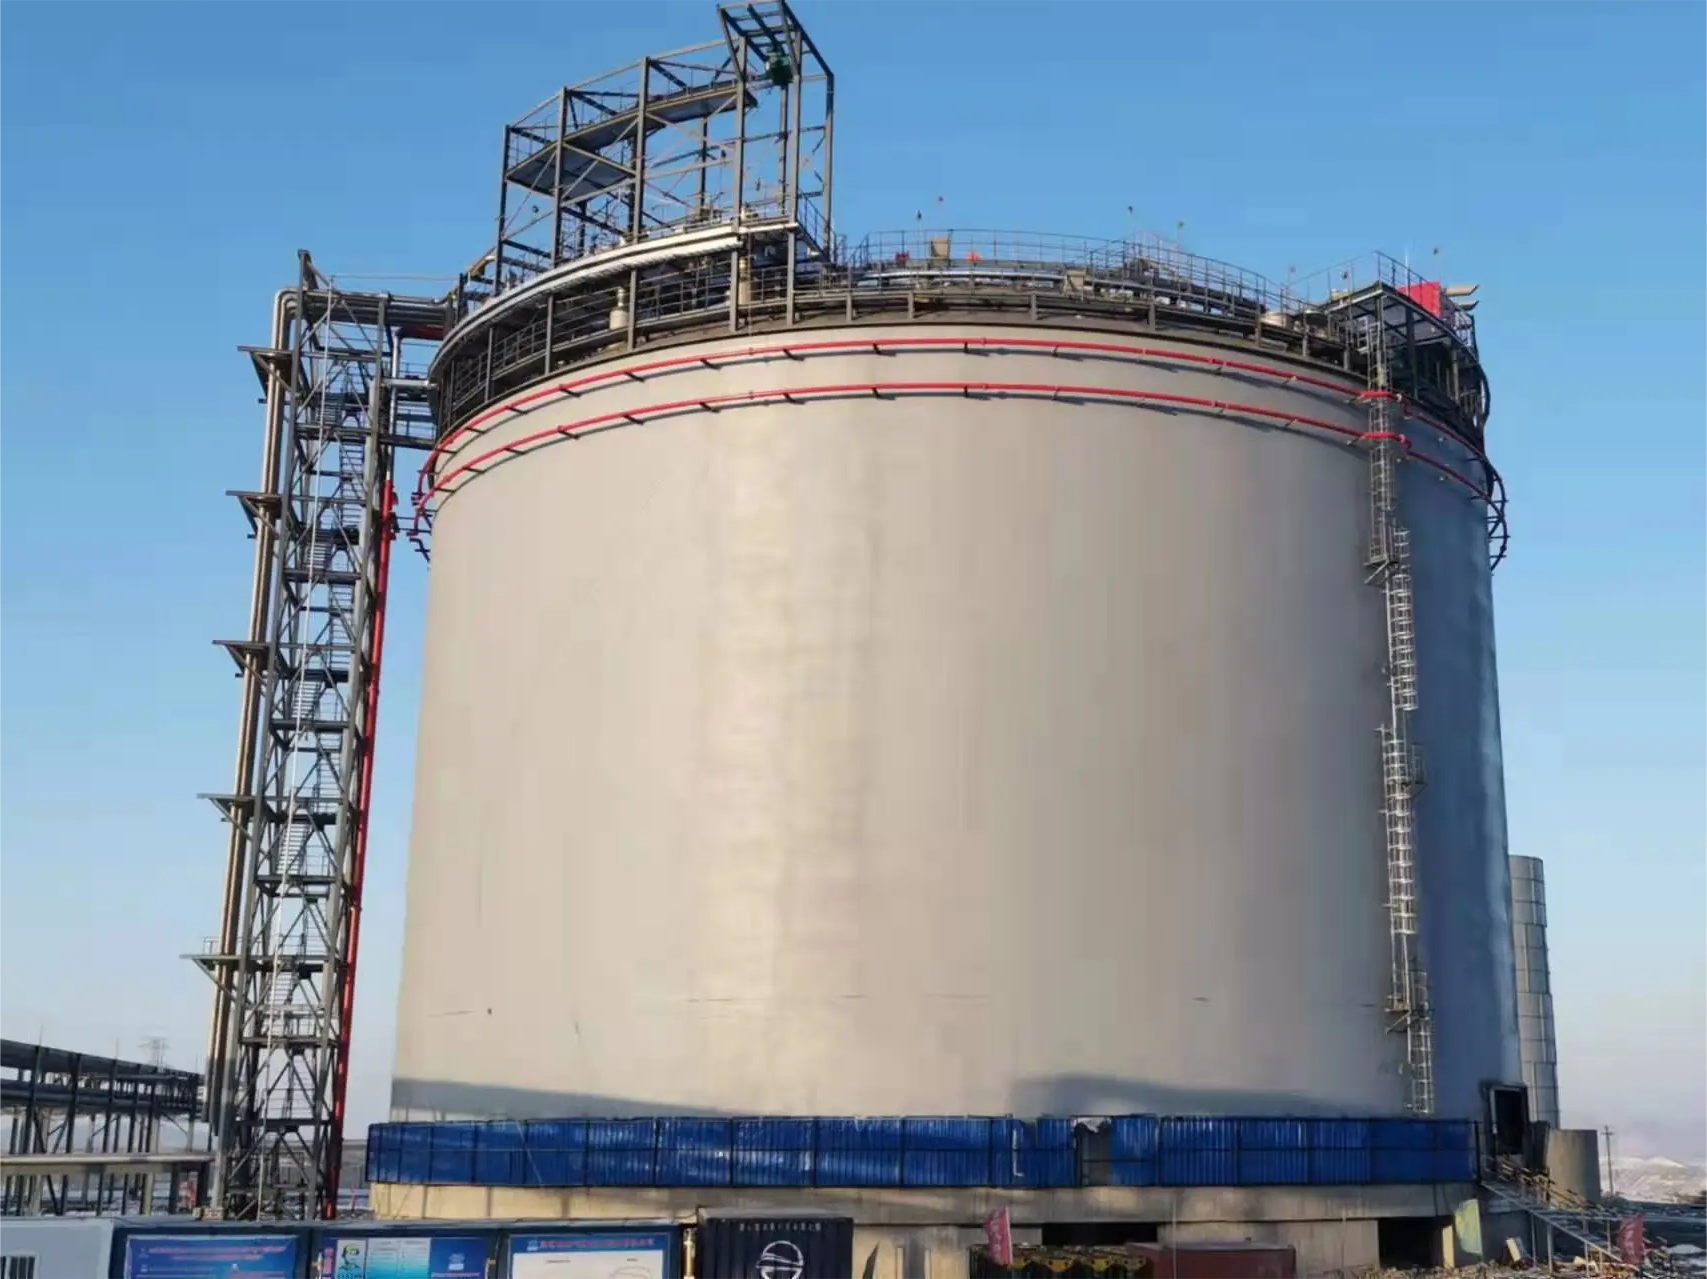 Congratulations on the construction of the large storage tank!